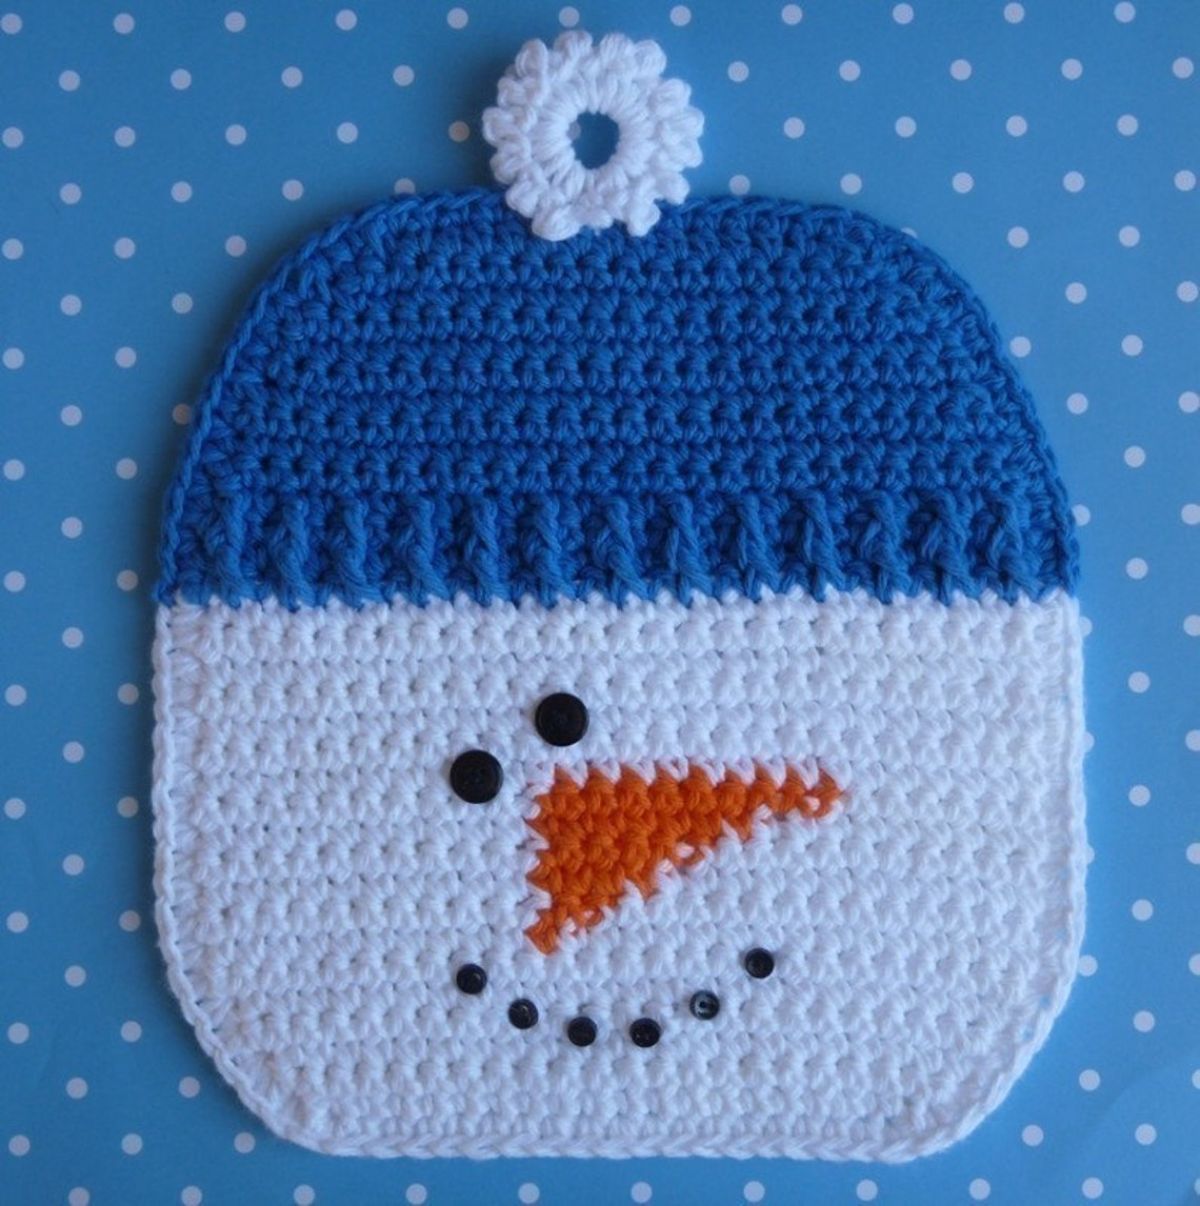 A white crochet snowman potholder with a blue beanie hat, orange carrot nose, and black eyes and mouth on a blue background.